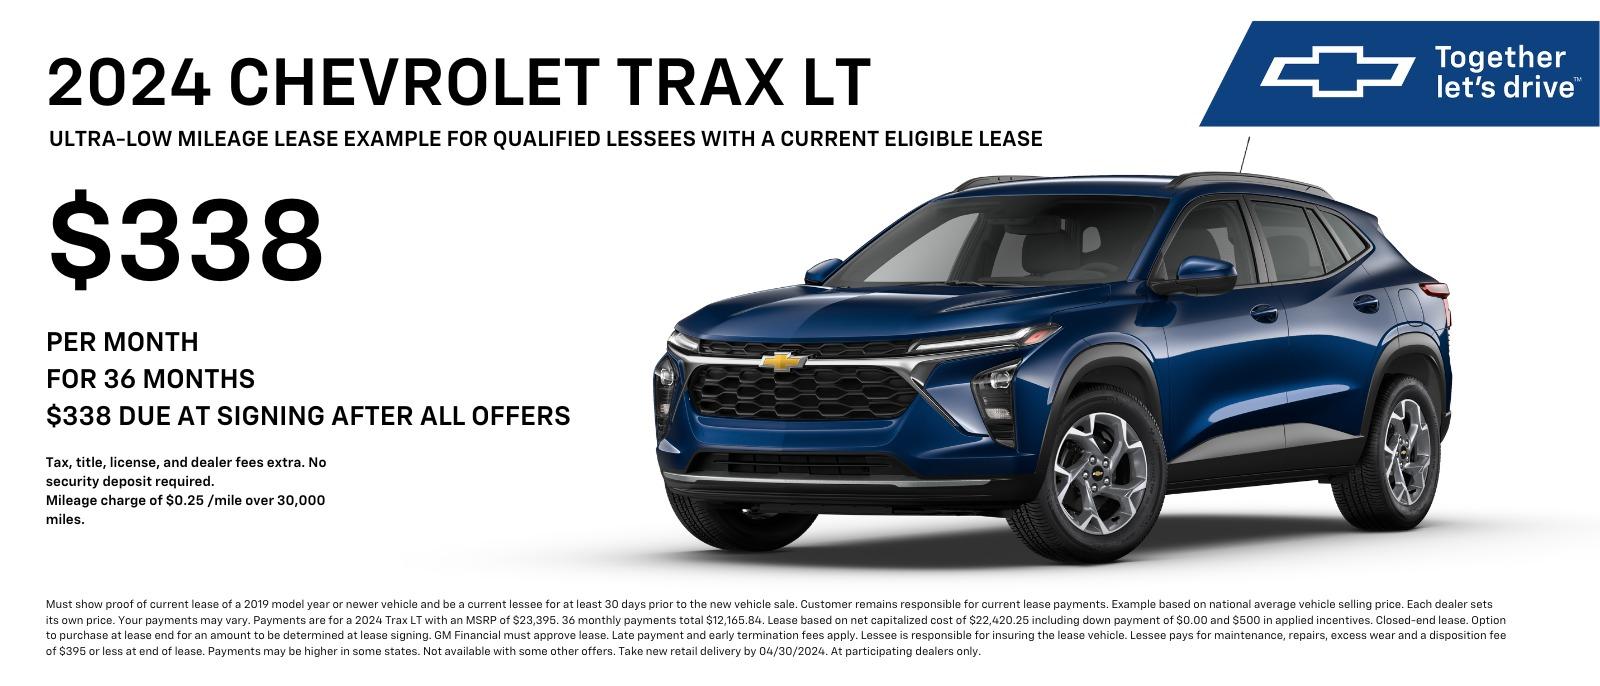 2024 Trax LT
$338 per month for 36 months